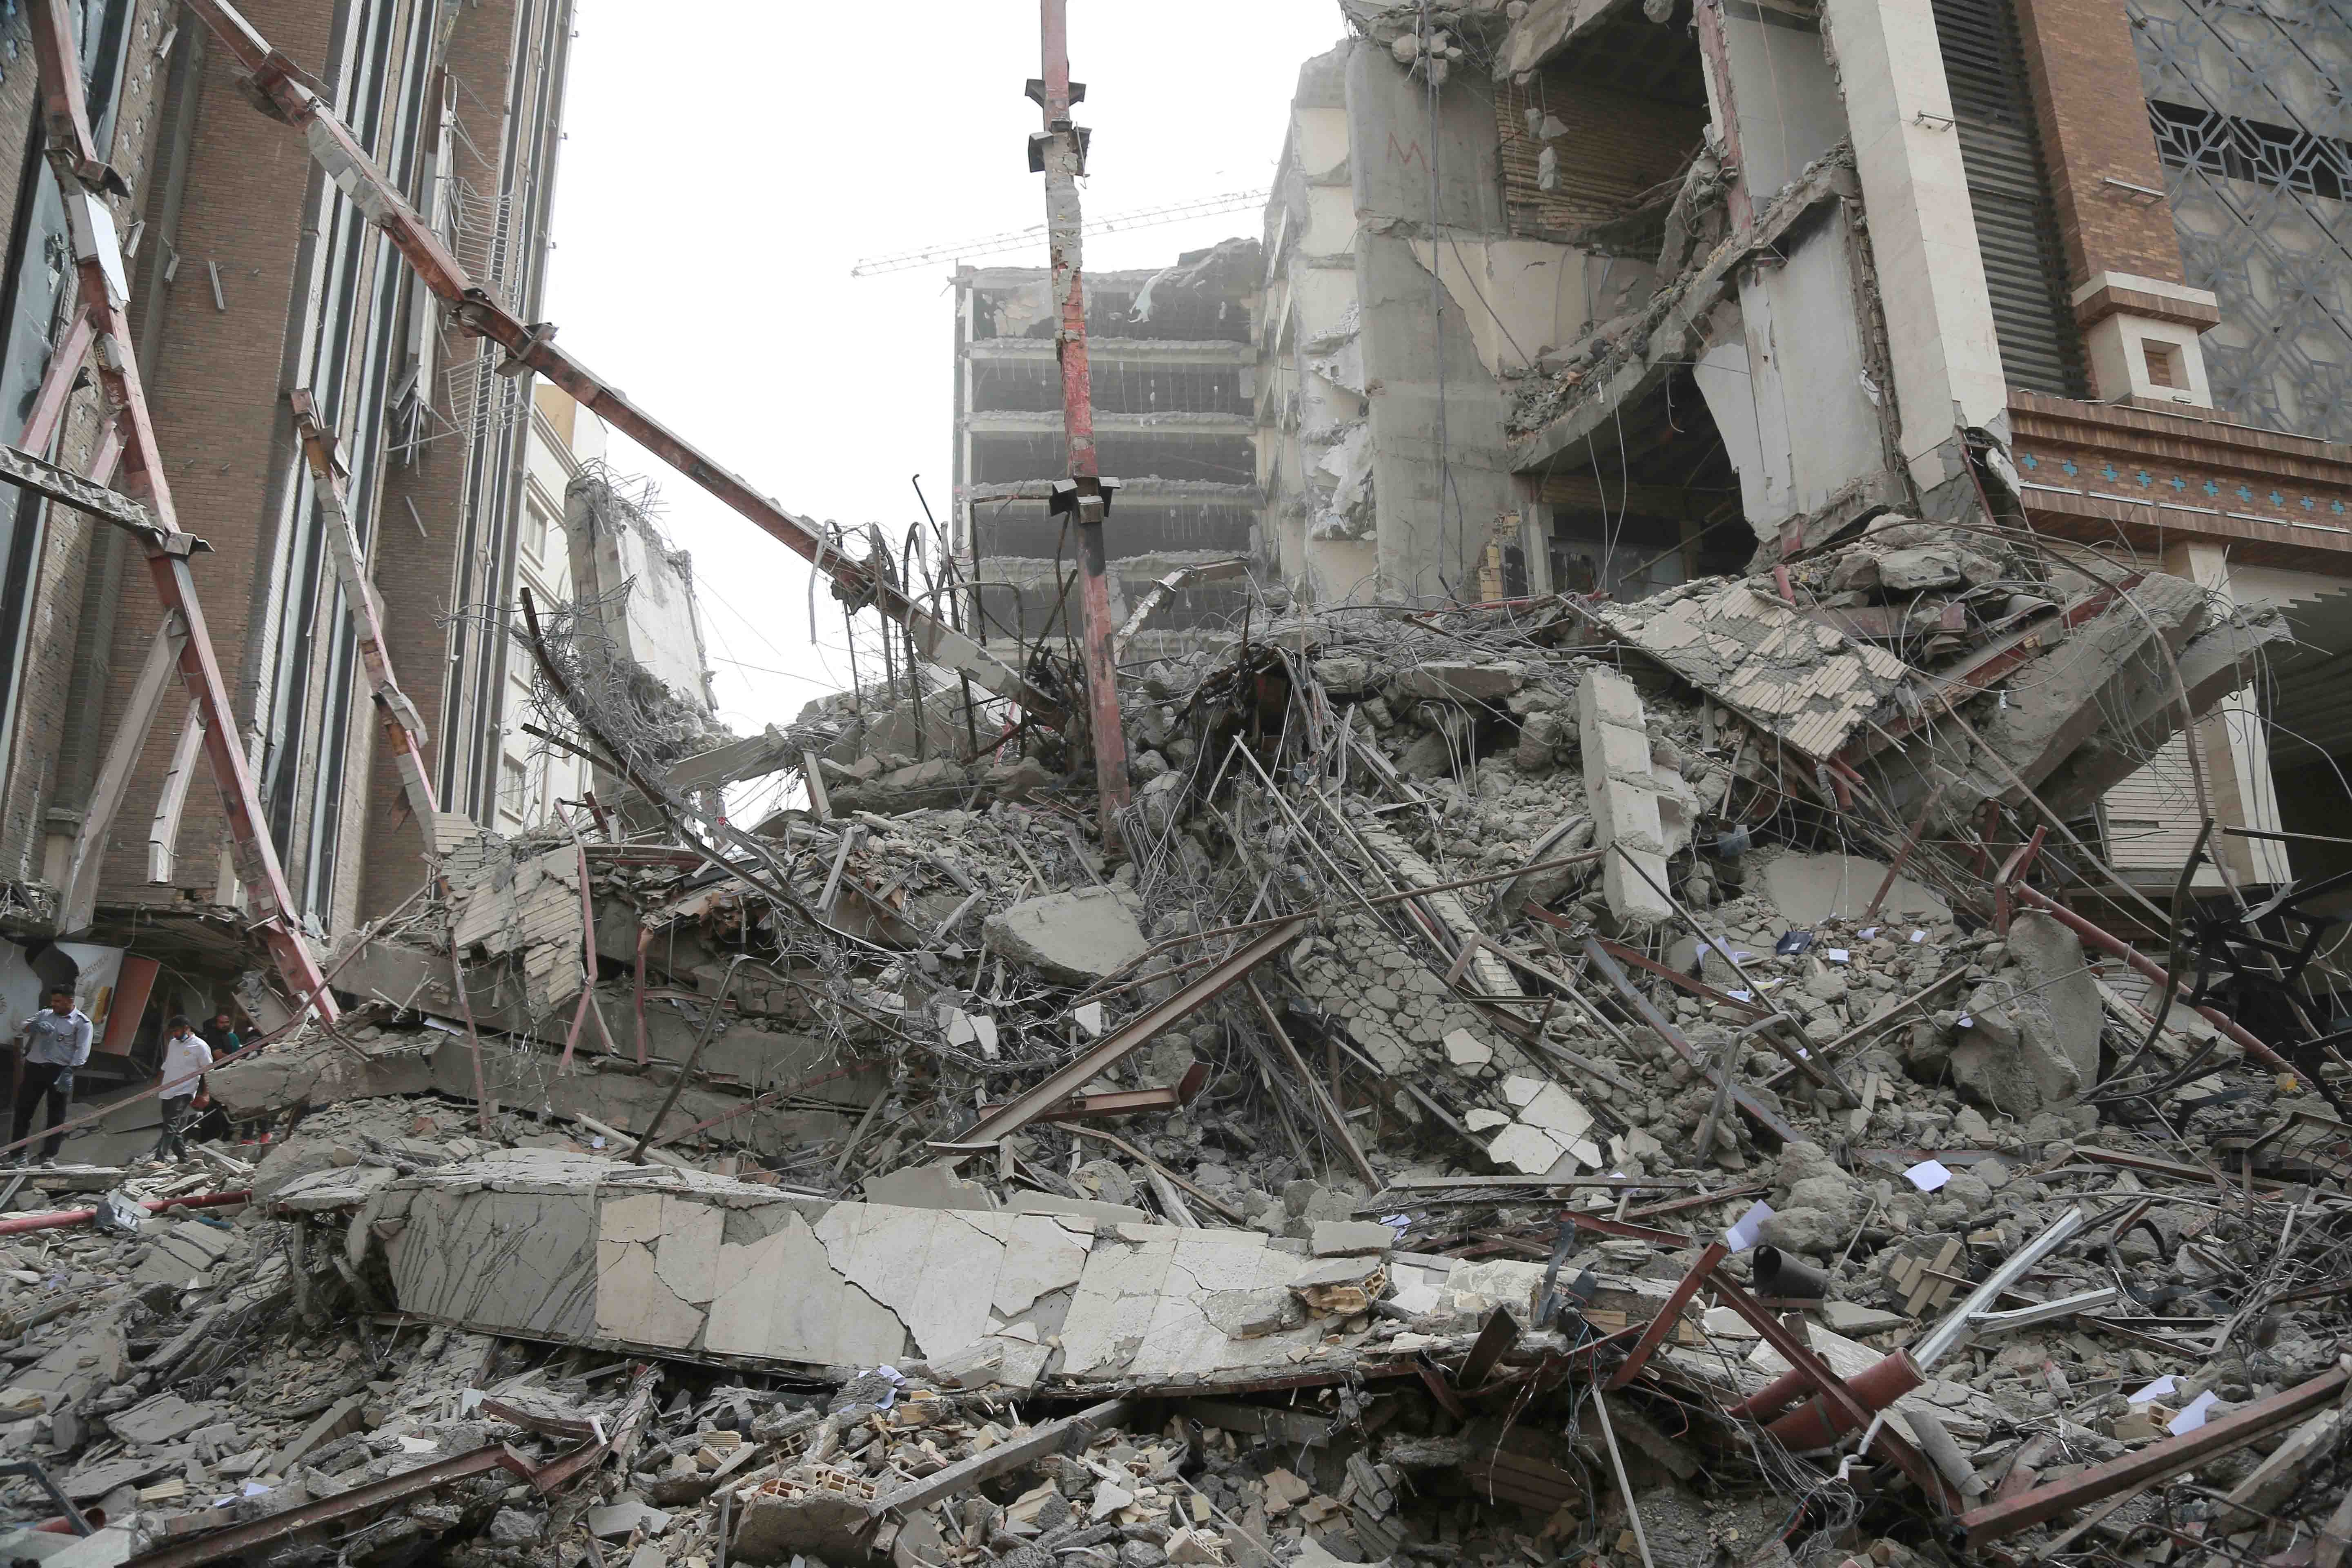 The site of a ten-story building collapse in Abadan, Iran, on May 23, 2022. 